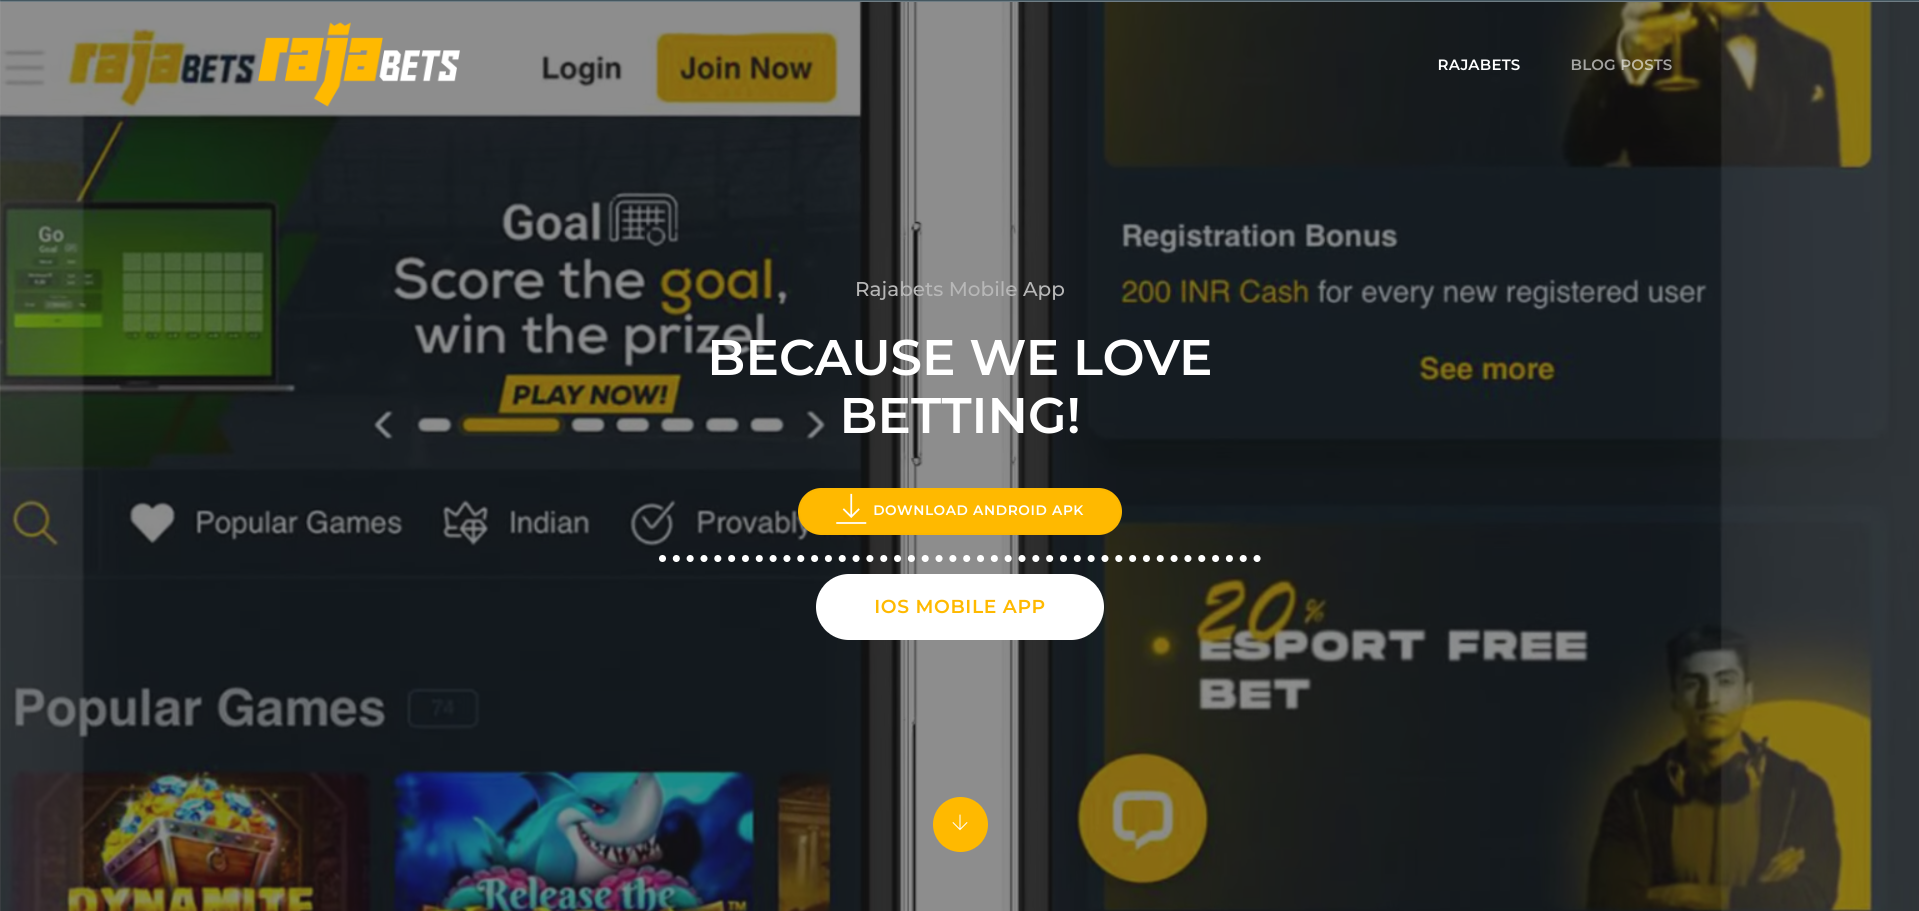 Can I use Rajabets on my mobile device?